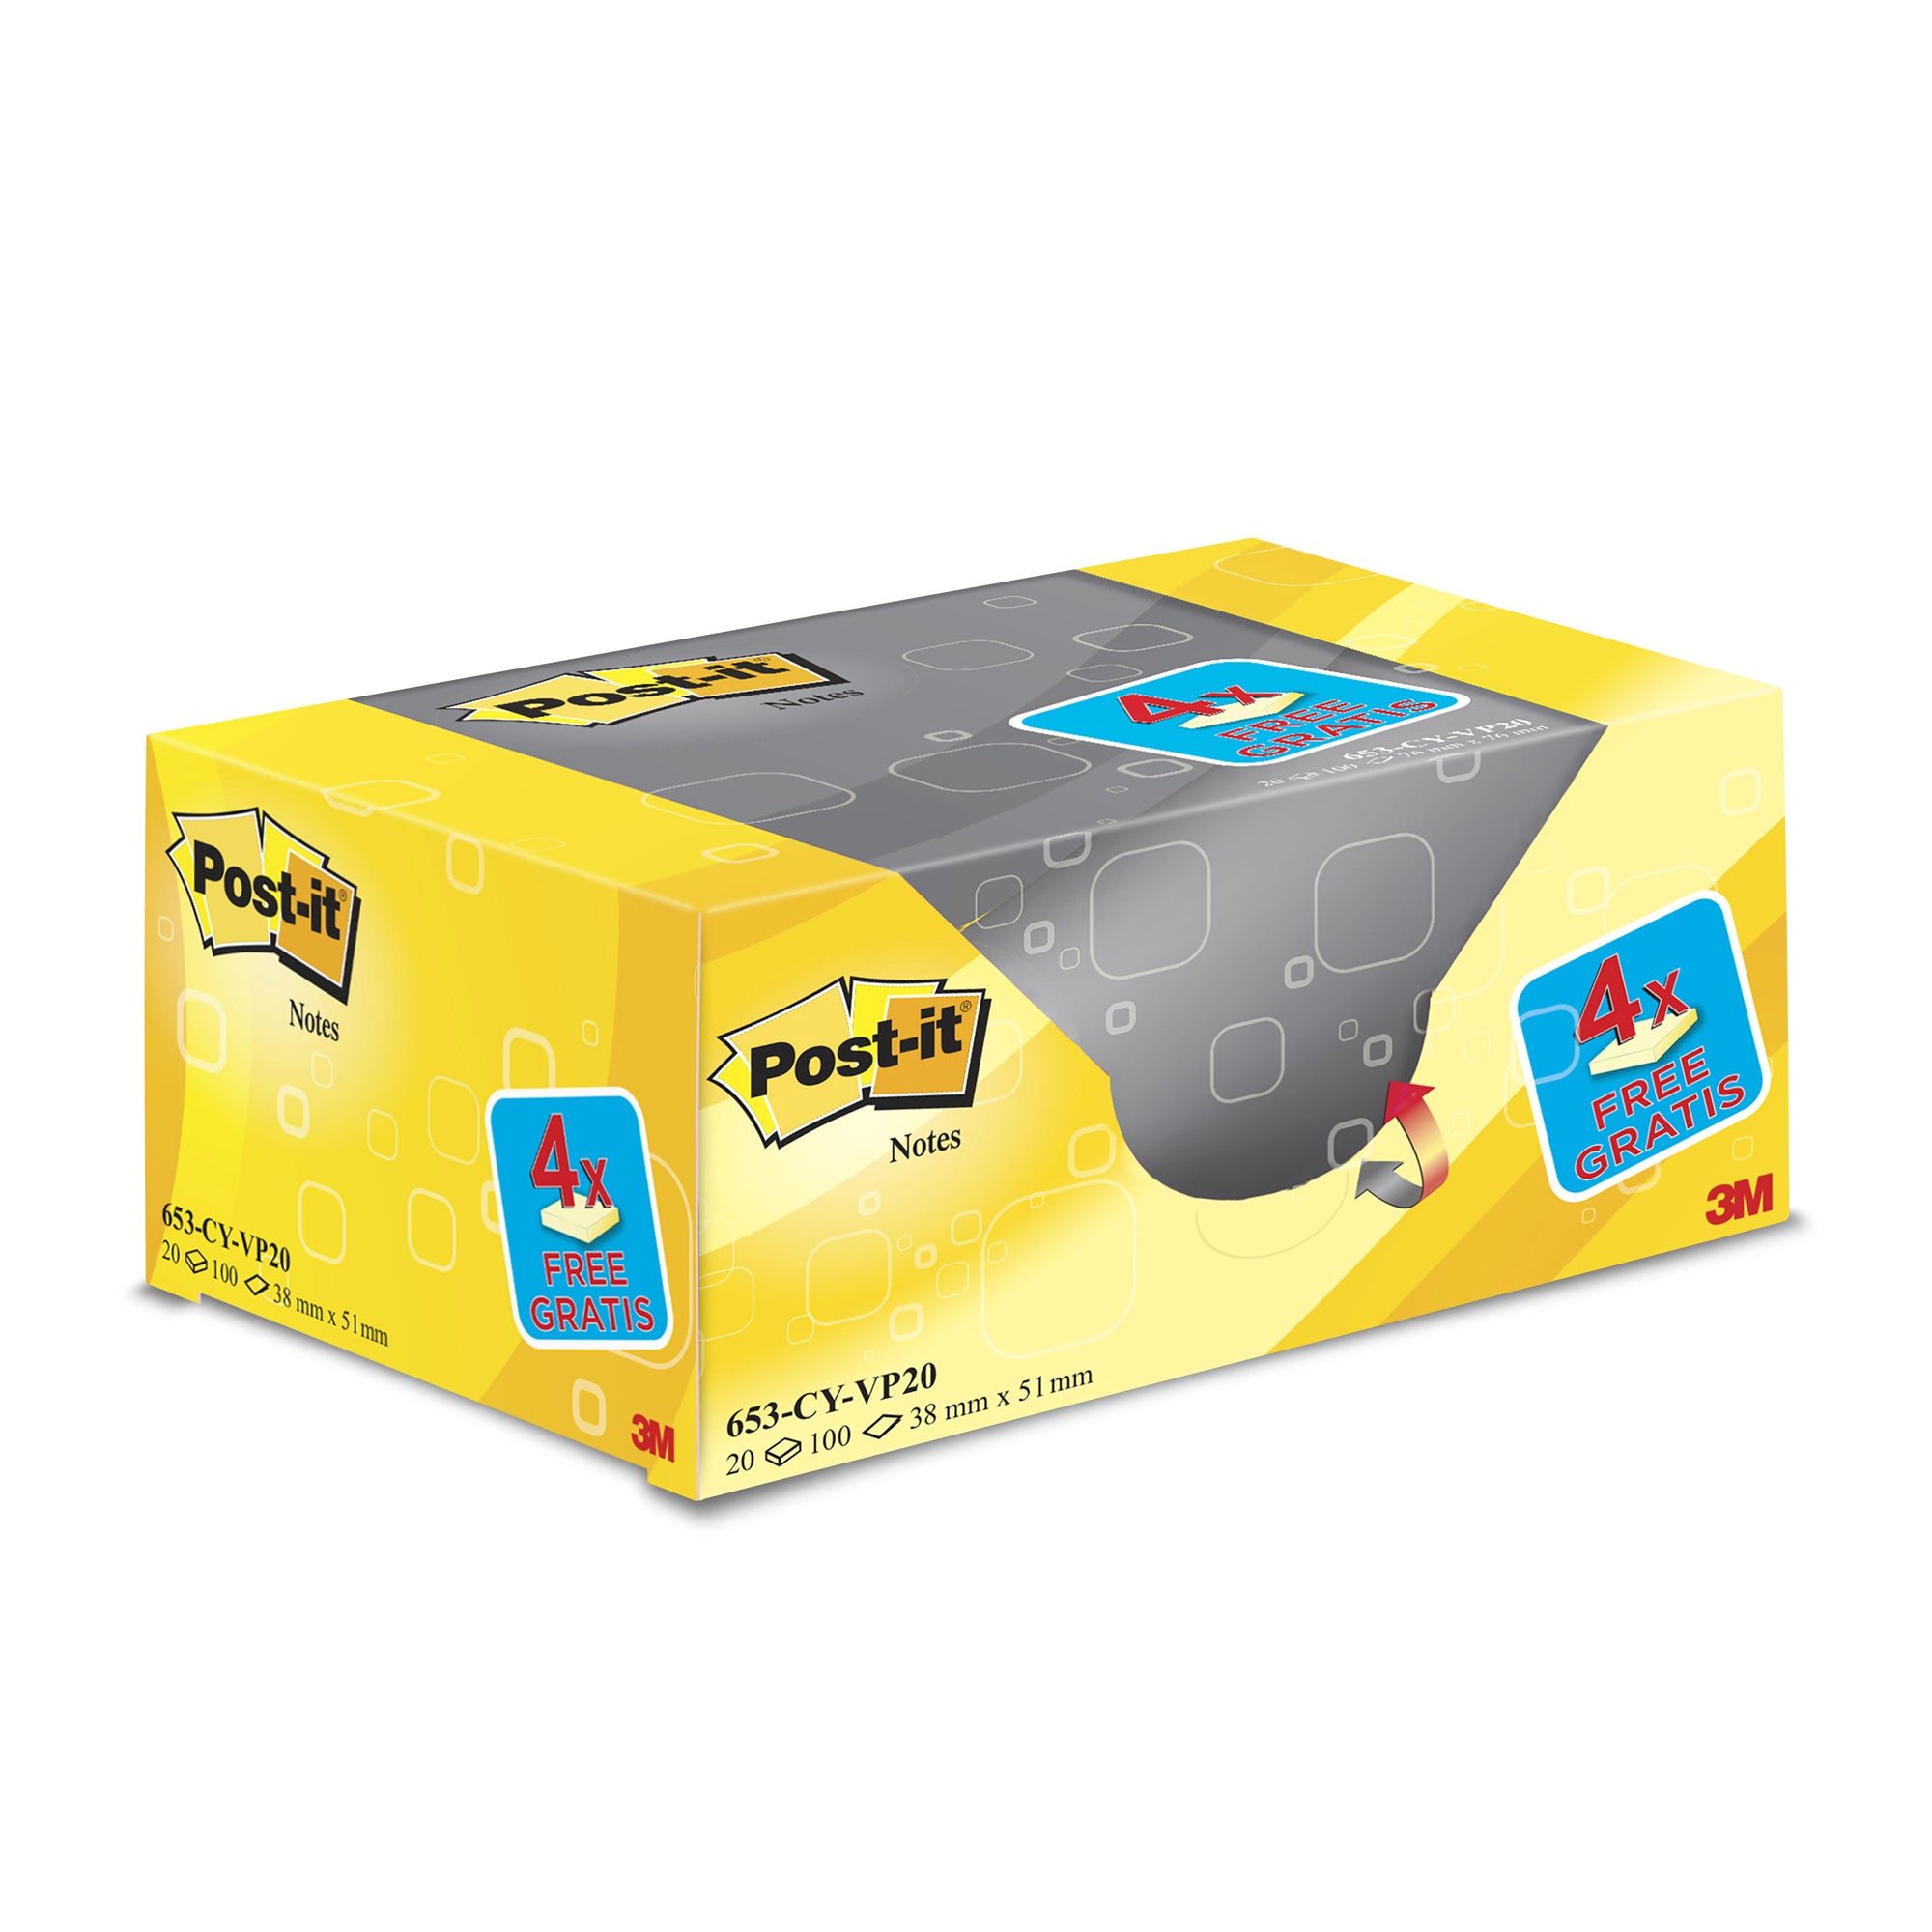 post-it-value-pack-164-blocco-100fg-giallo-canary-38x51mm-72gr-653cy-vp20